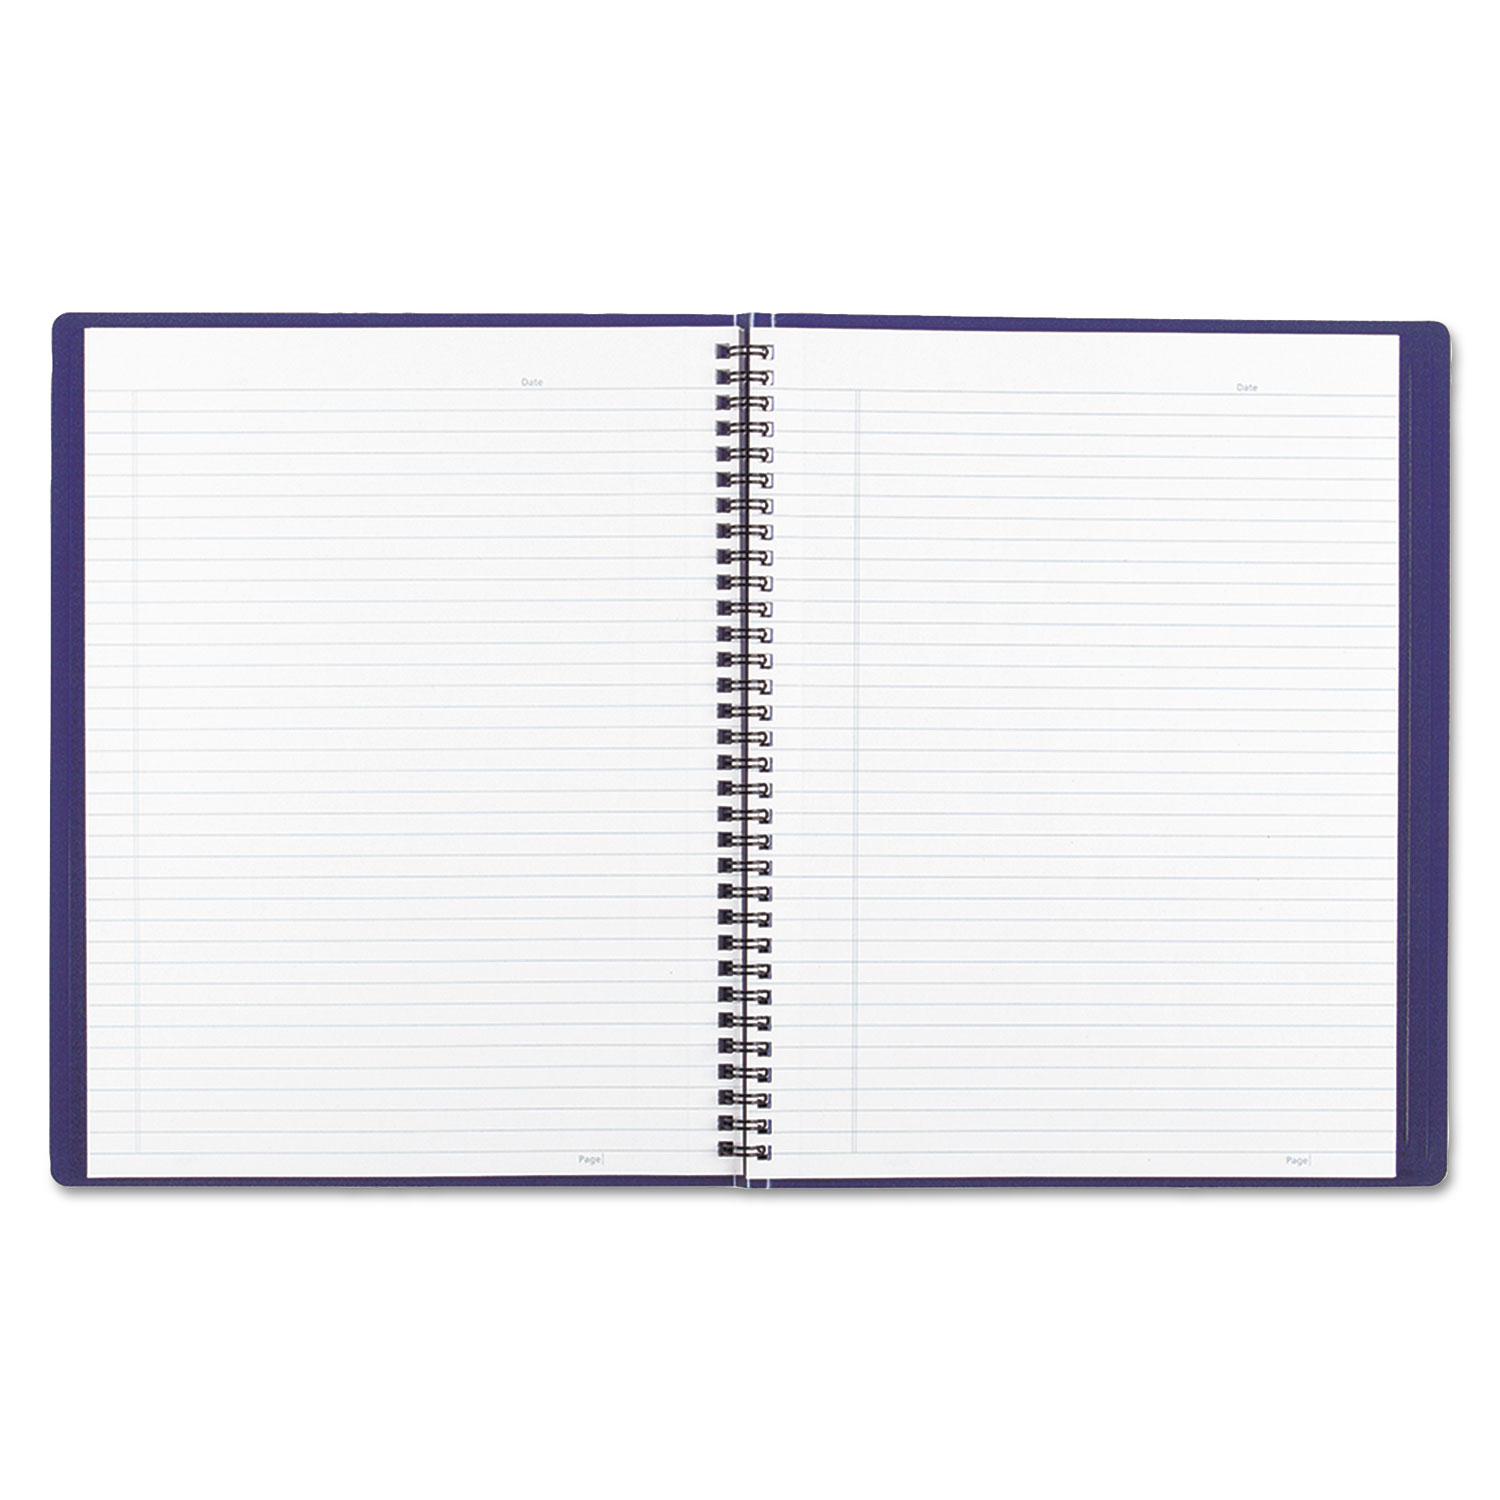 Poly Cover Notebook, 11 x 8 1/2, Ruled, Twin Wire Binding, Blue Cover, 80 Sheets